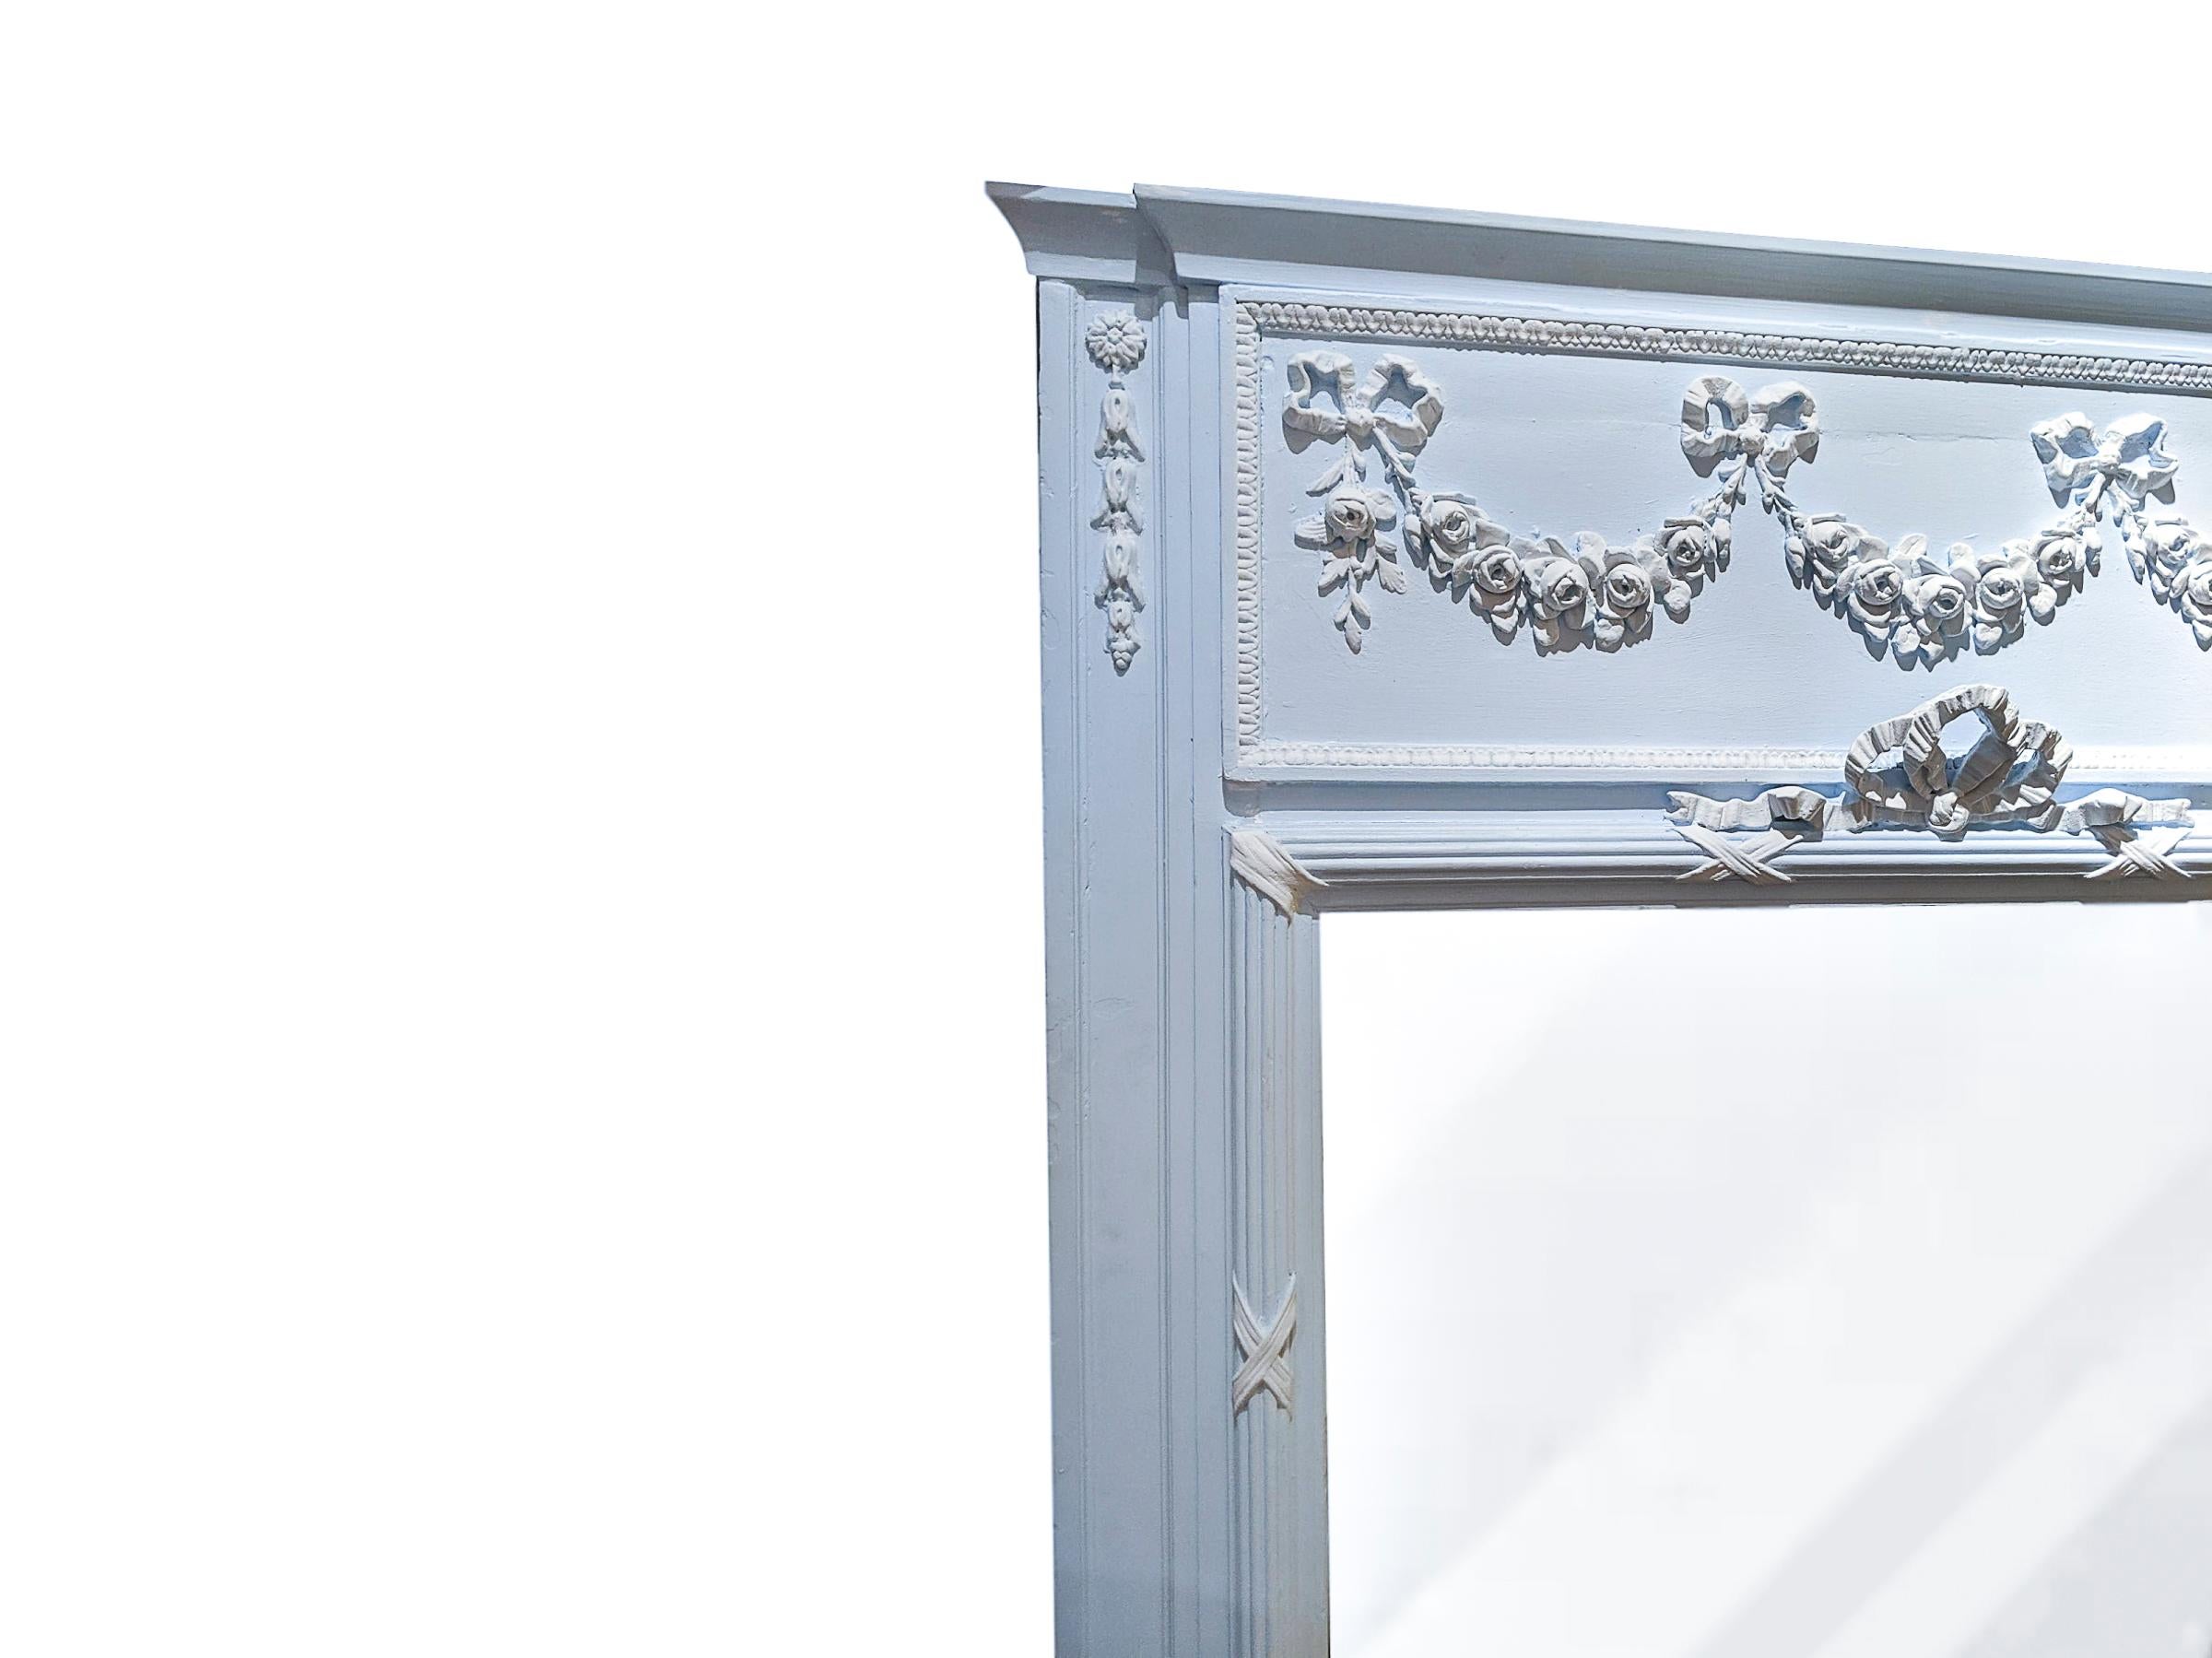 Early 19th century French Trumeau mirror in powder blue and white molded gesso floral swags. Readed and ribbon posts.